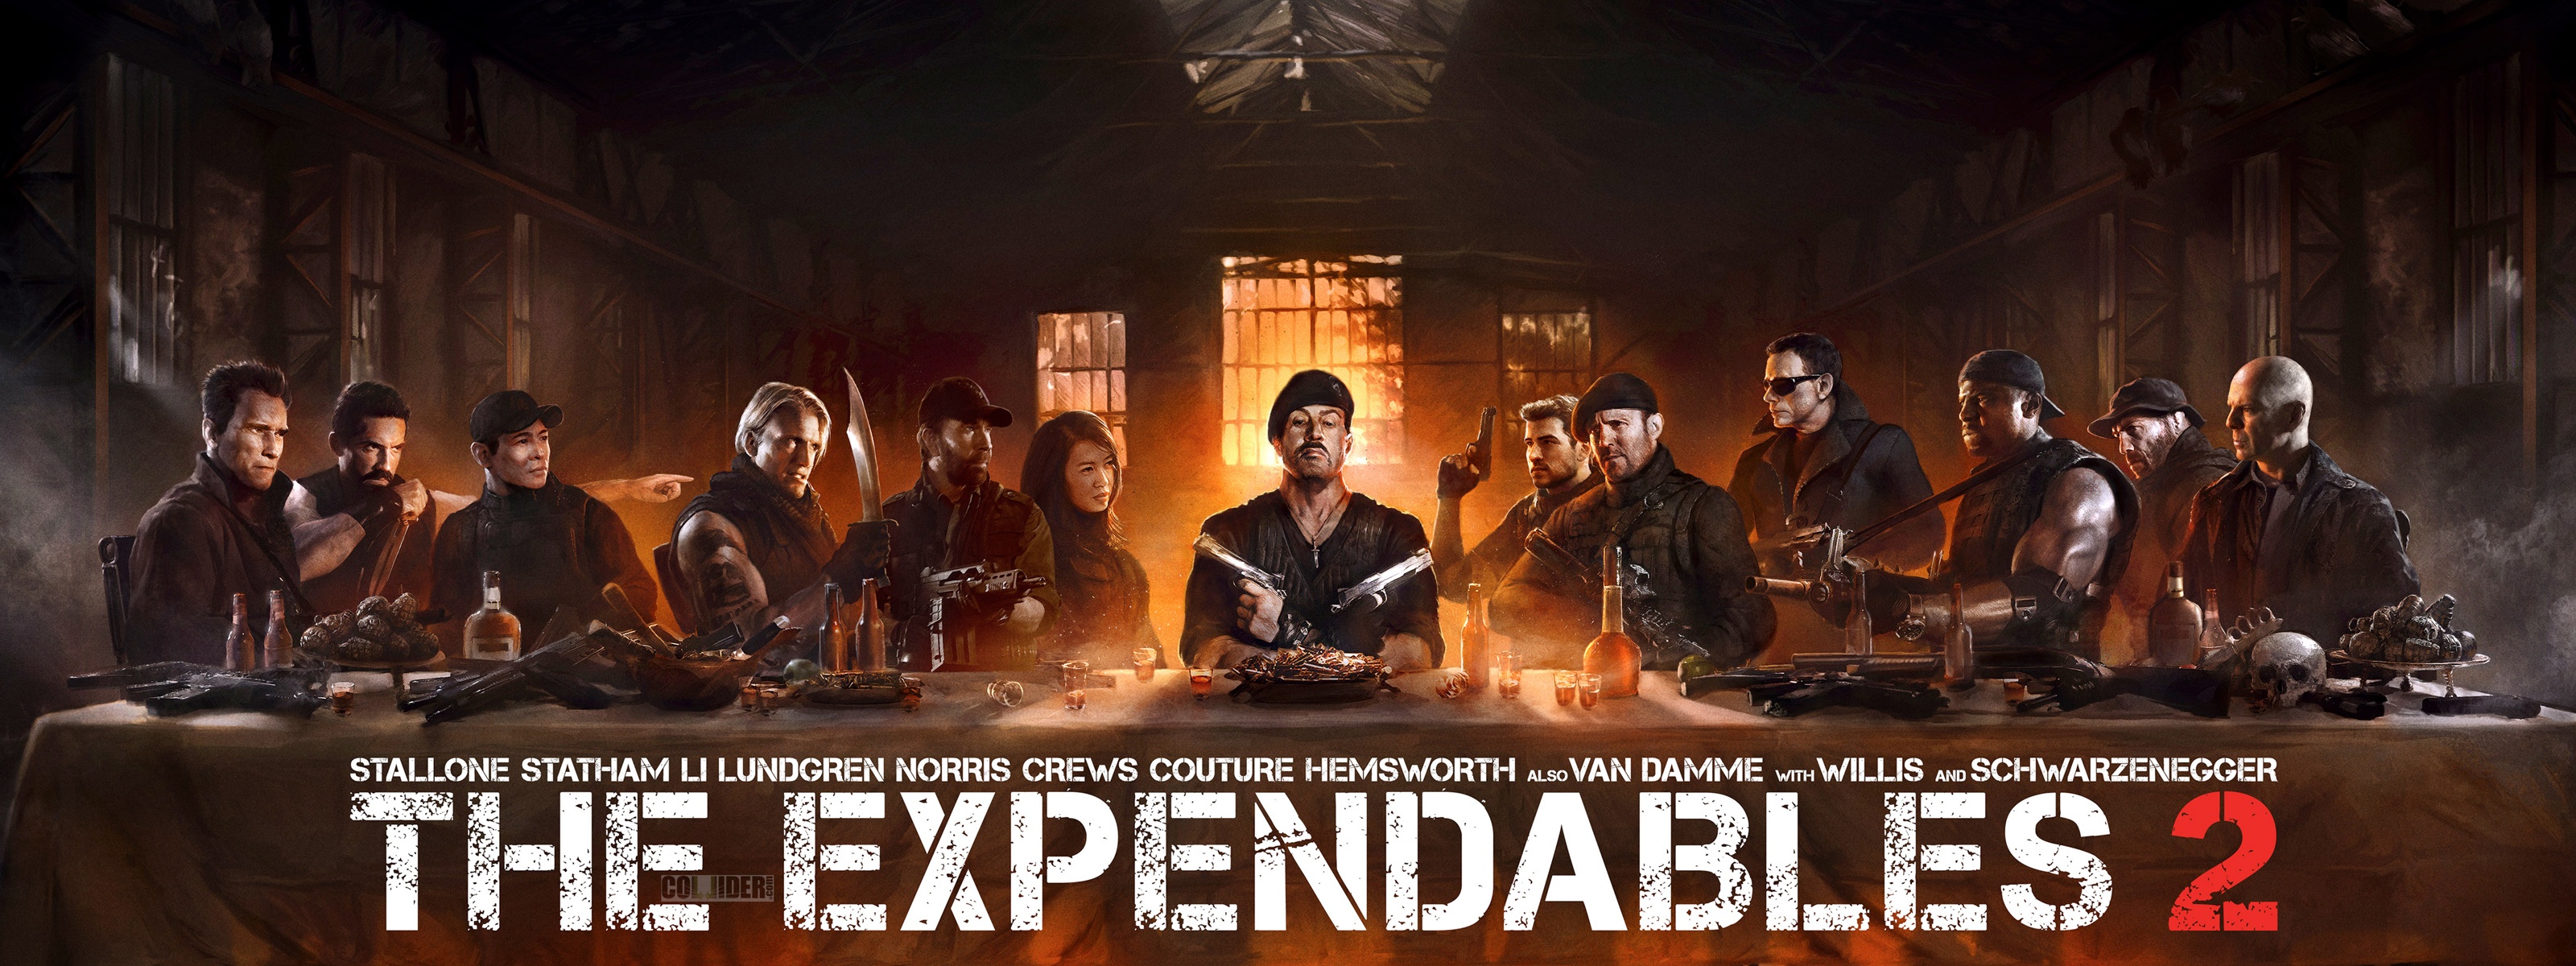 Expendables The Last Supper Wallpaper HD